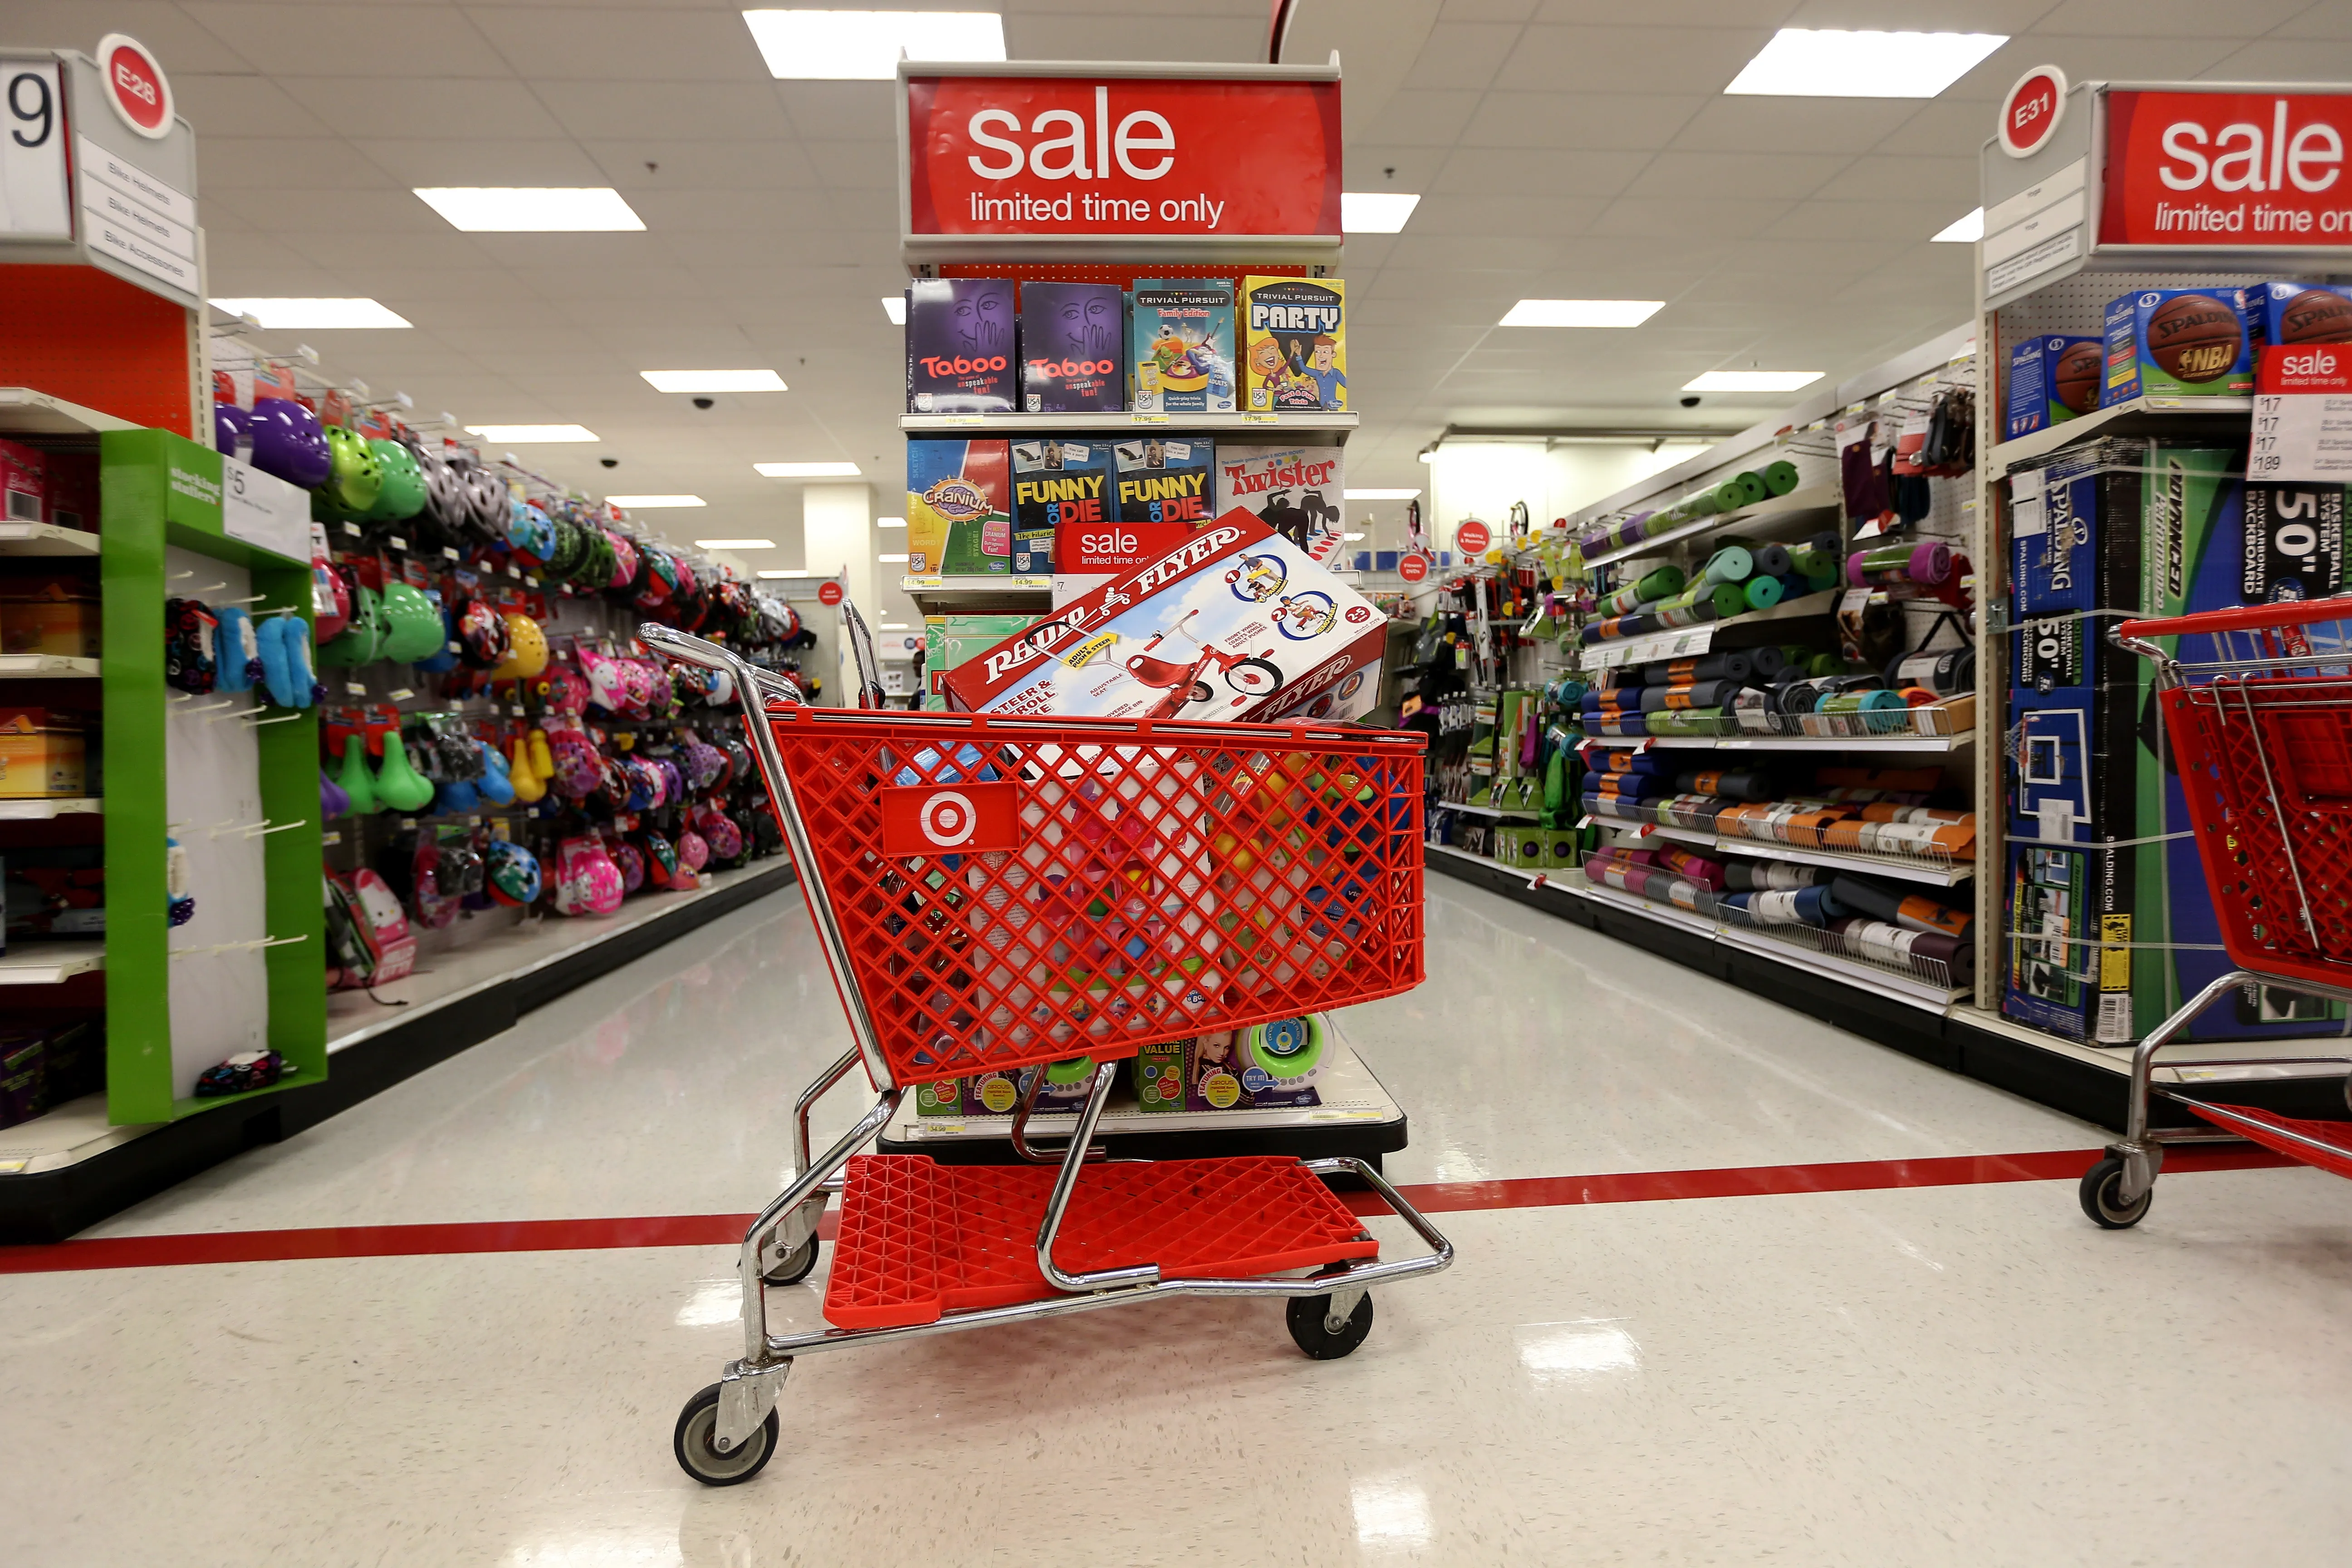 Target Has an Amazing 'Green Monday' Sale Today With Deals on Home Goods, Toys, and Video Games